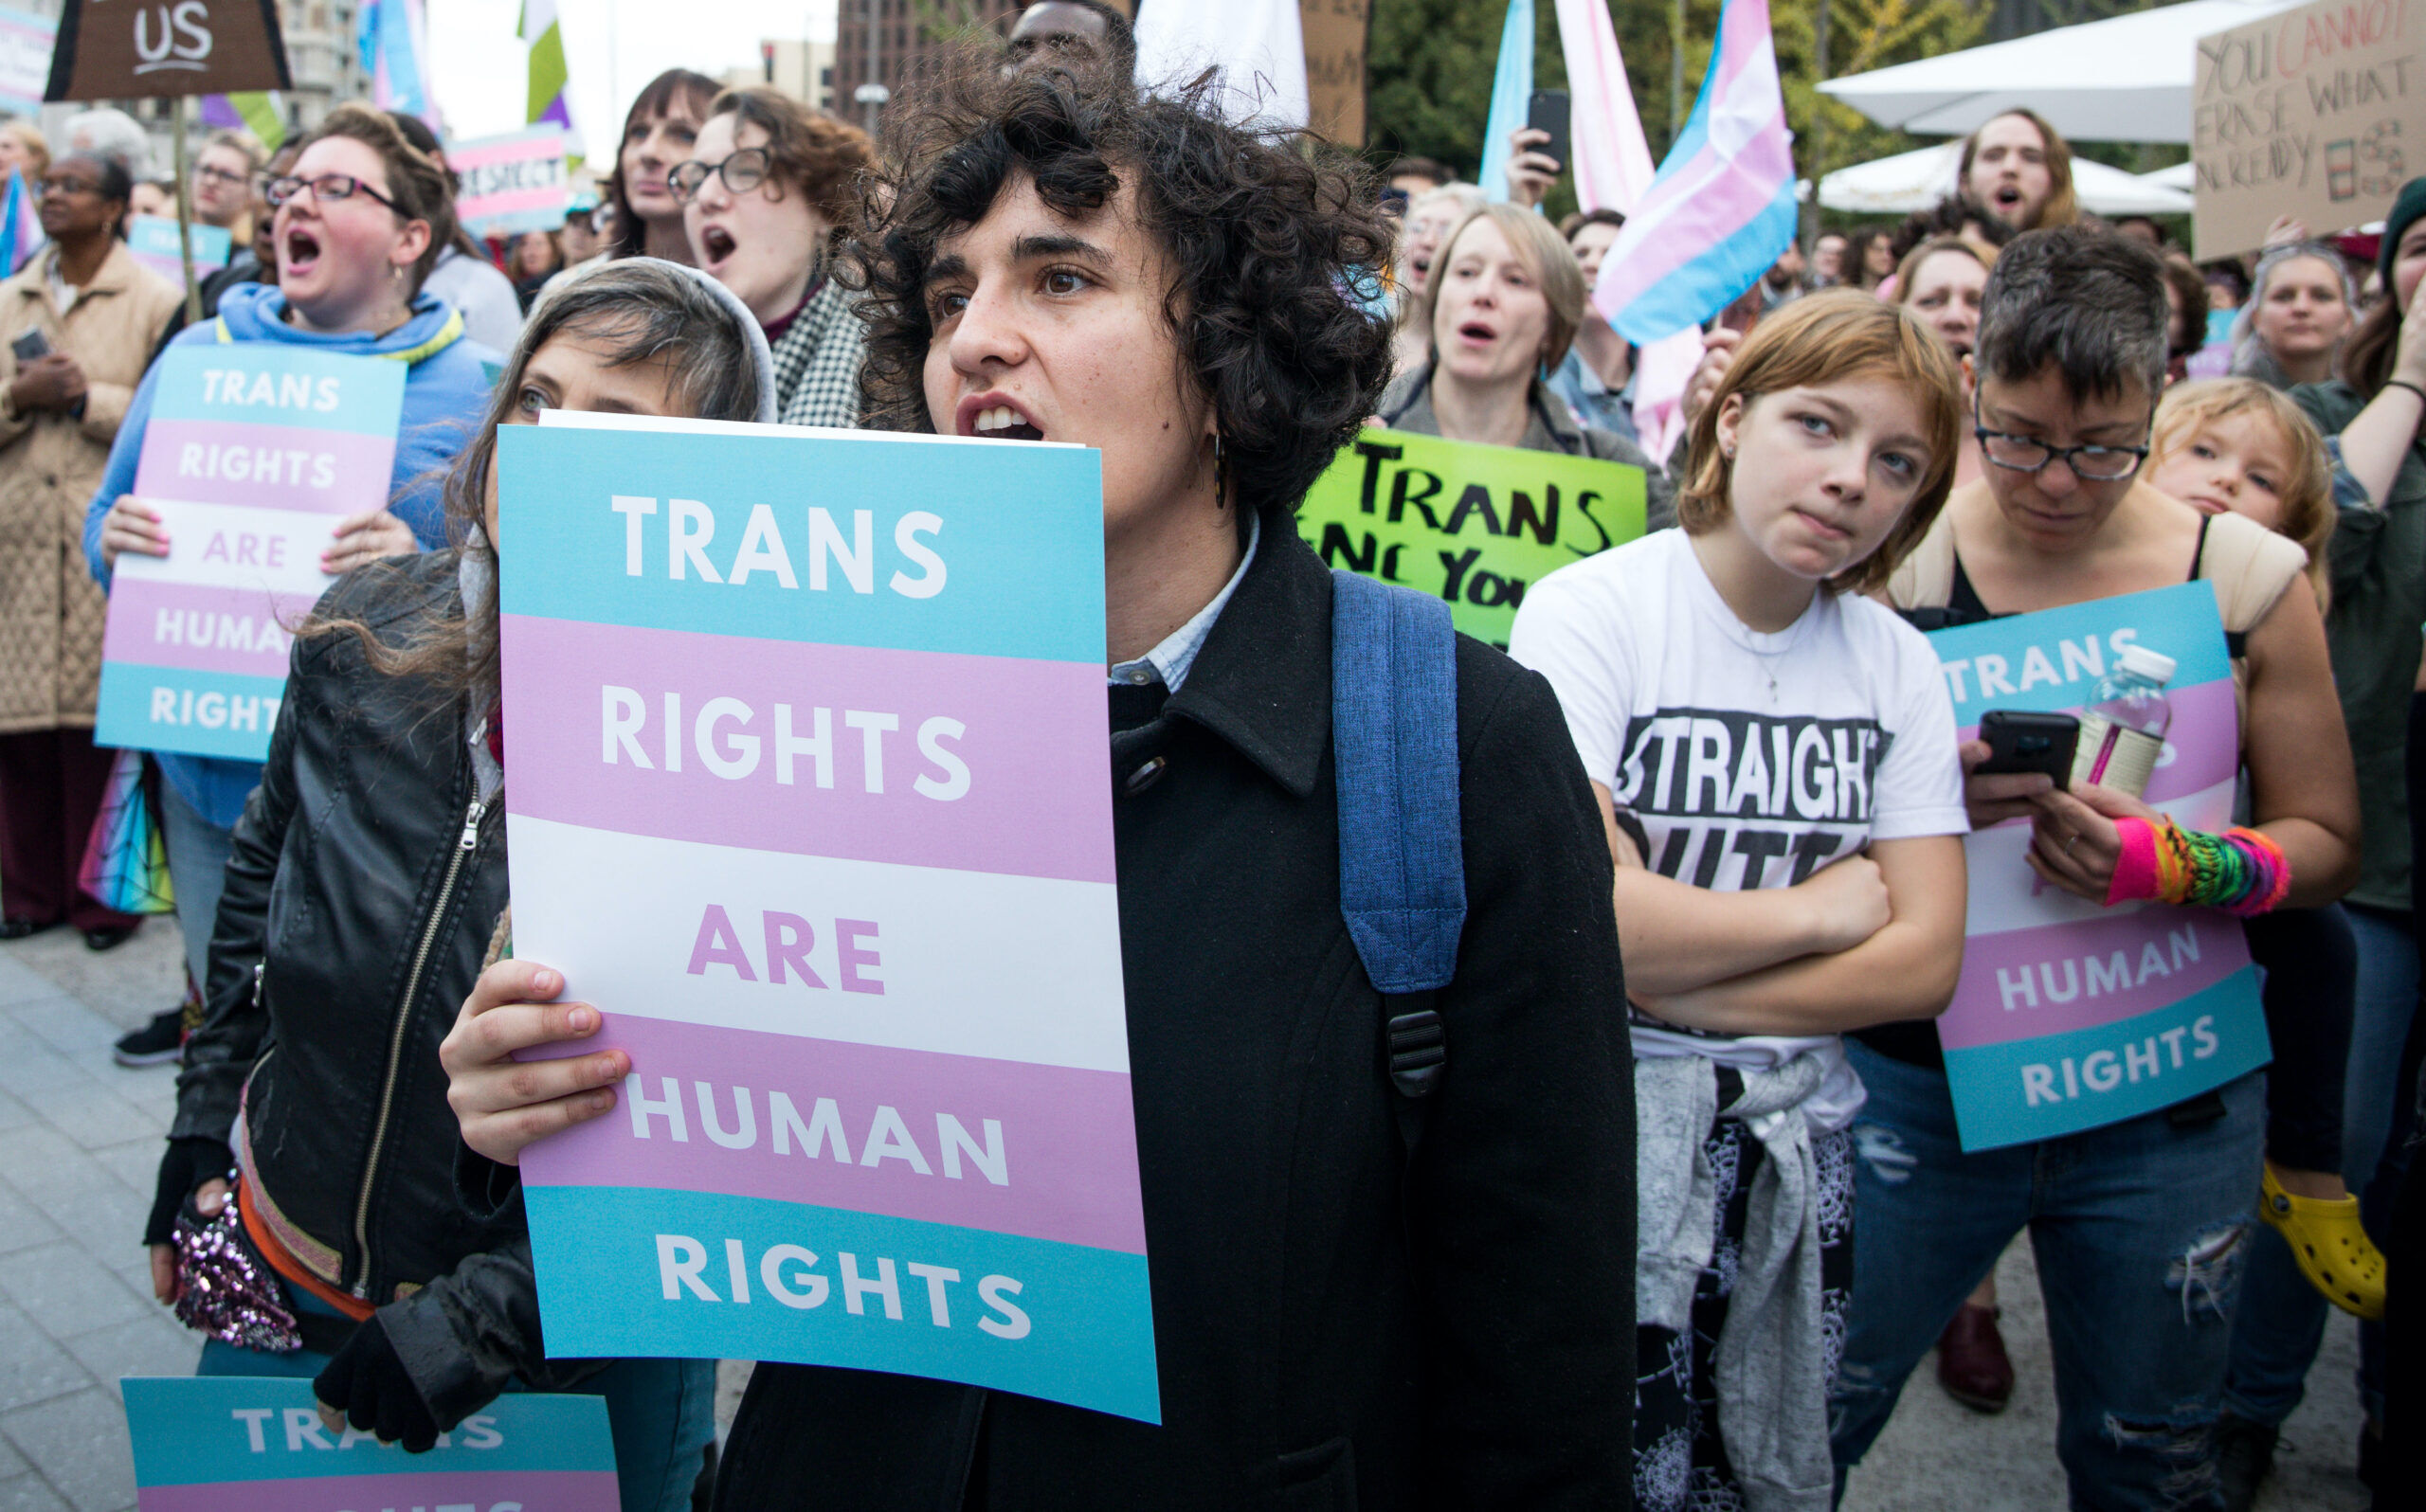 Transgender youths in an outdoor city space hold protest signs declaring that "trans rights are human rights."